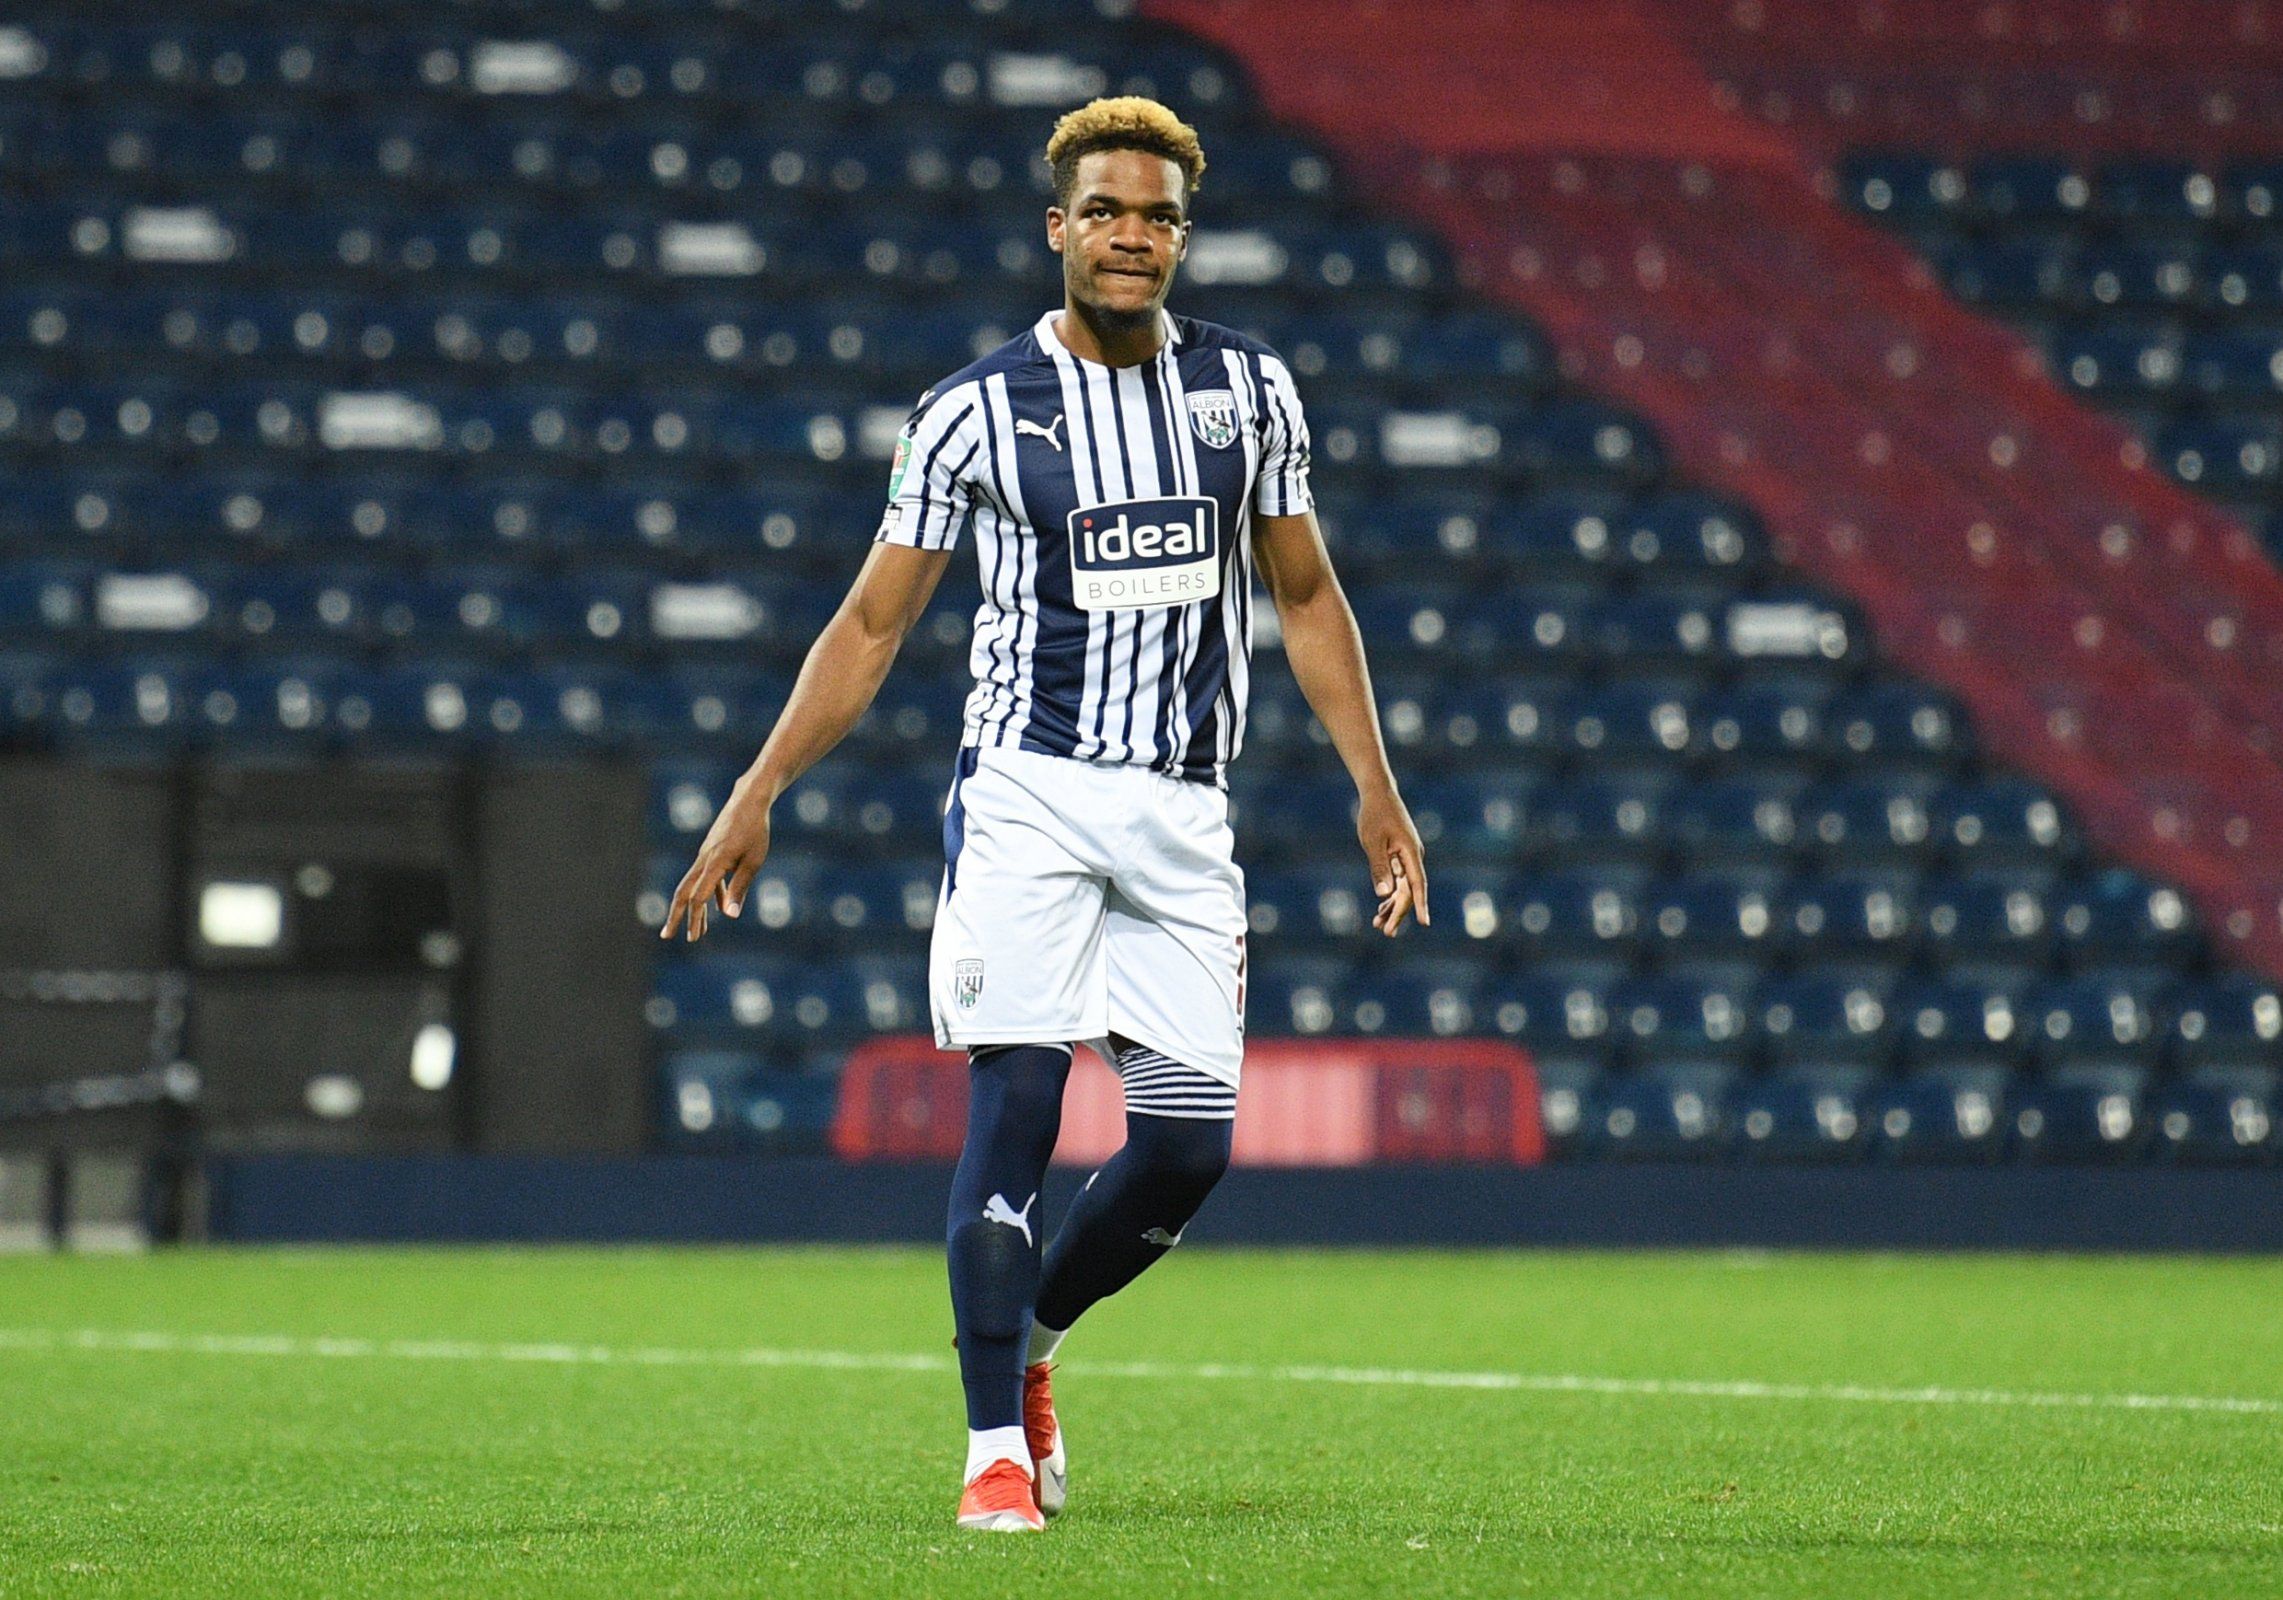 west brom winger grady diangana looks frustrated after missed penalty carabao cup